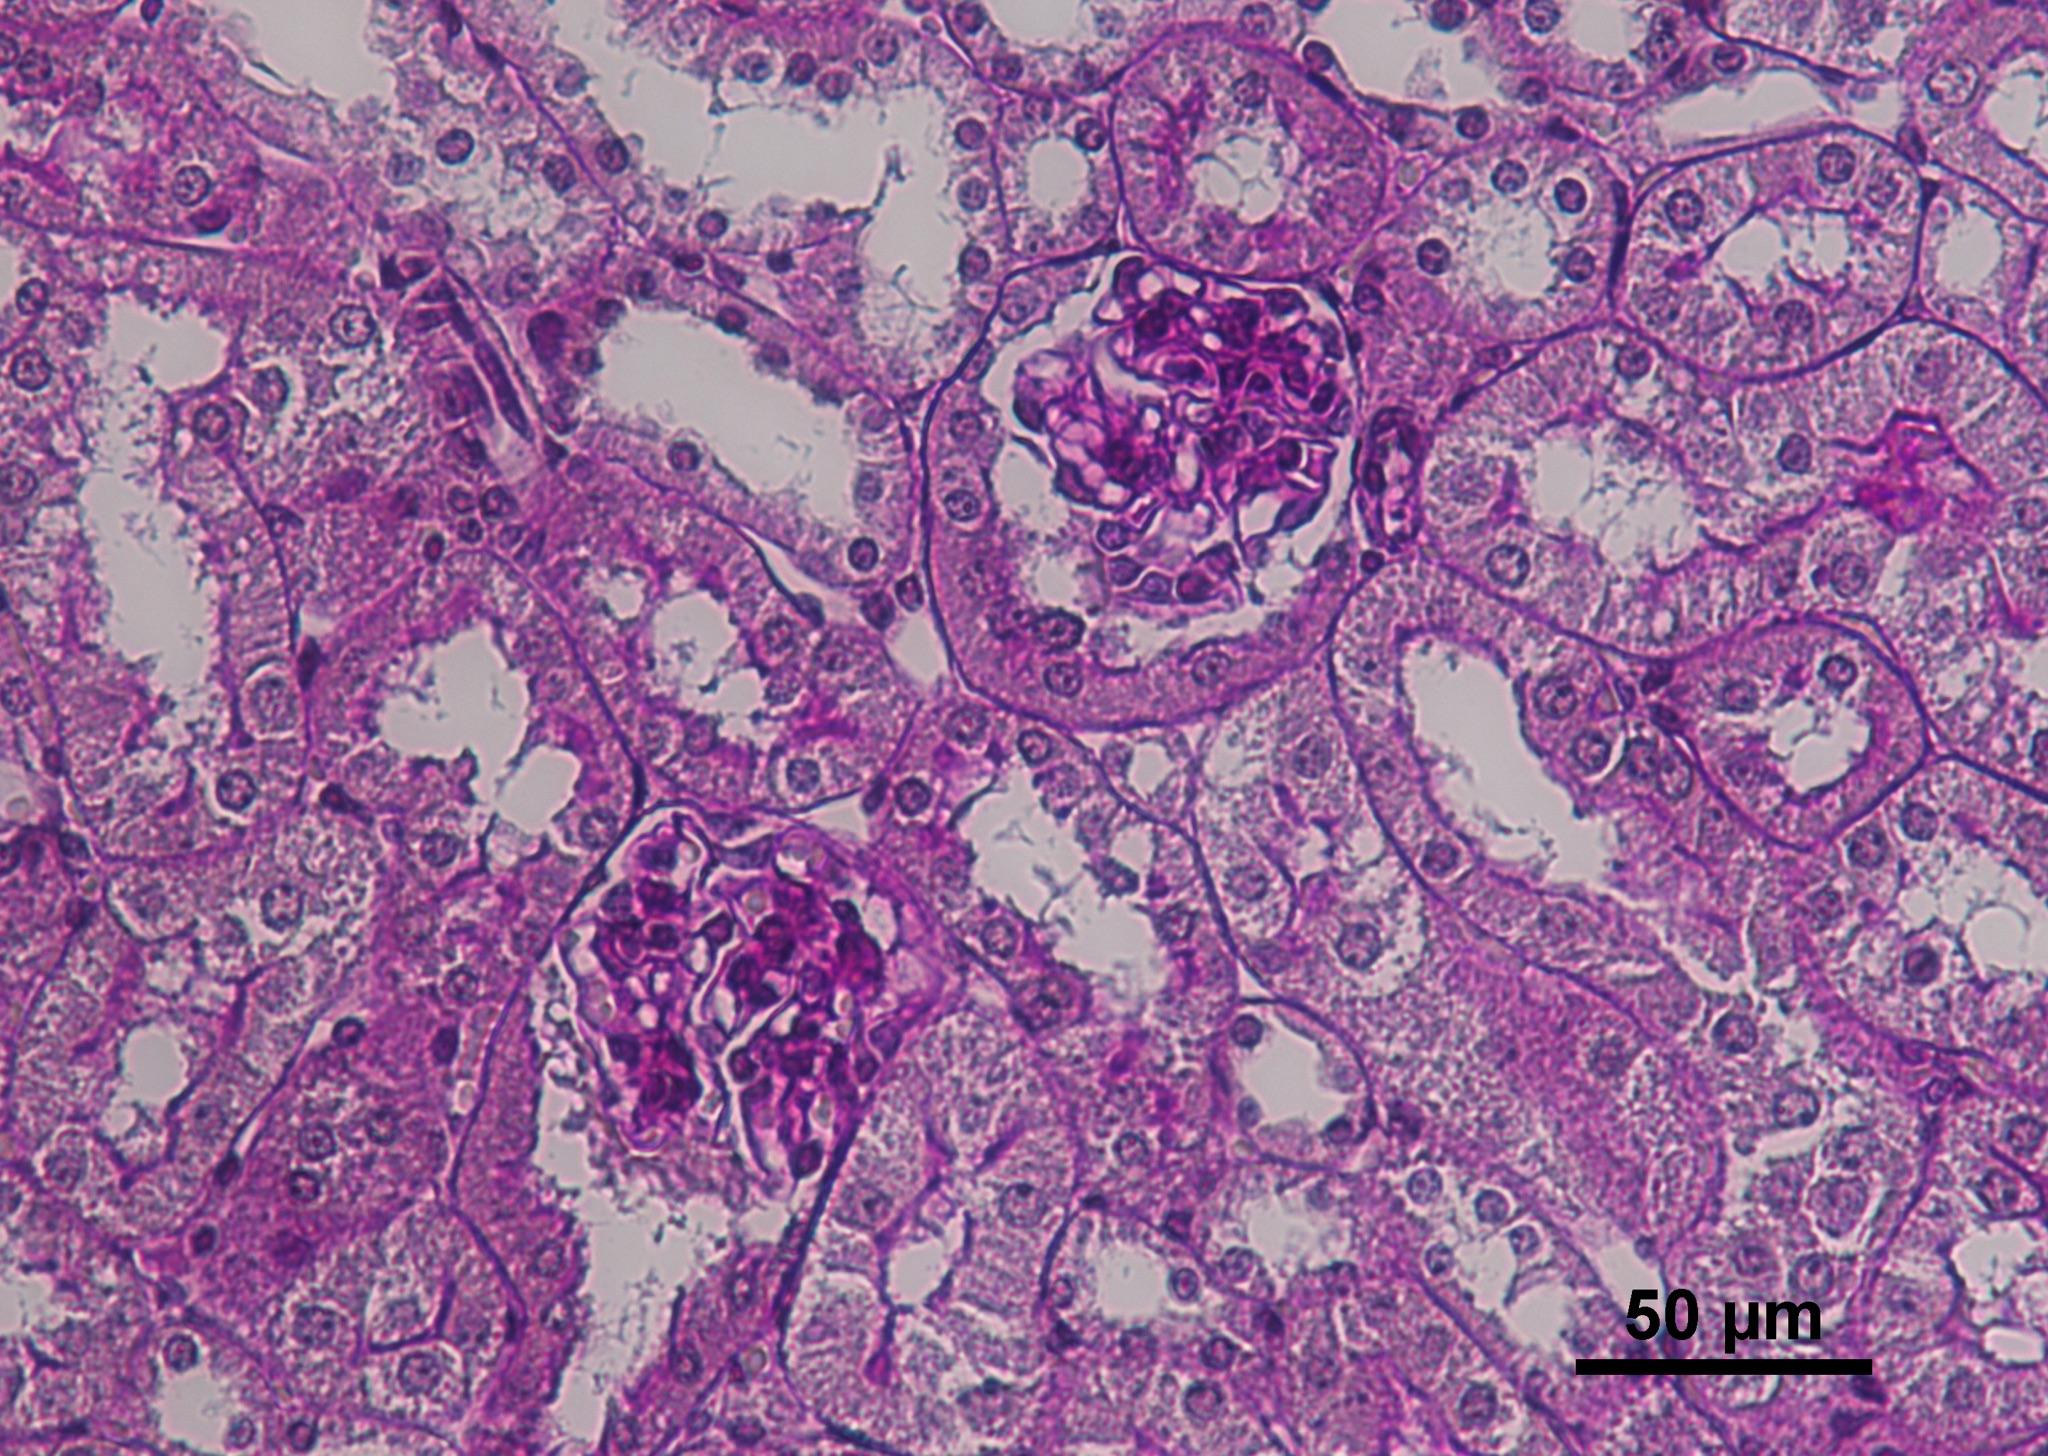 Kidney cross section of glomeruli (collection of blood vessels within the kidney).